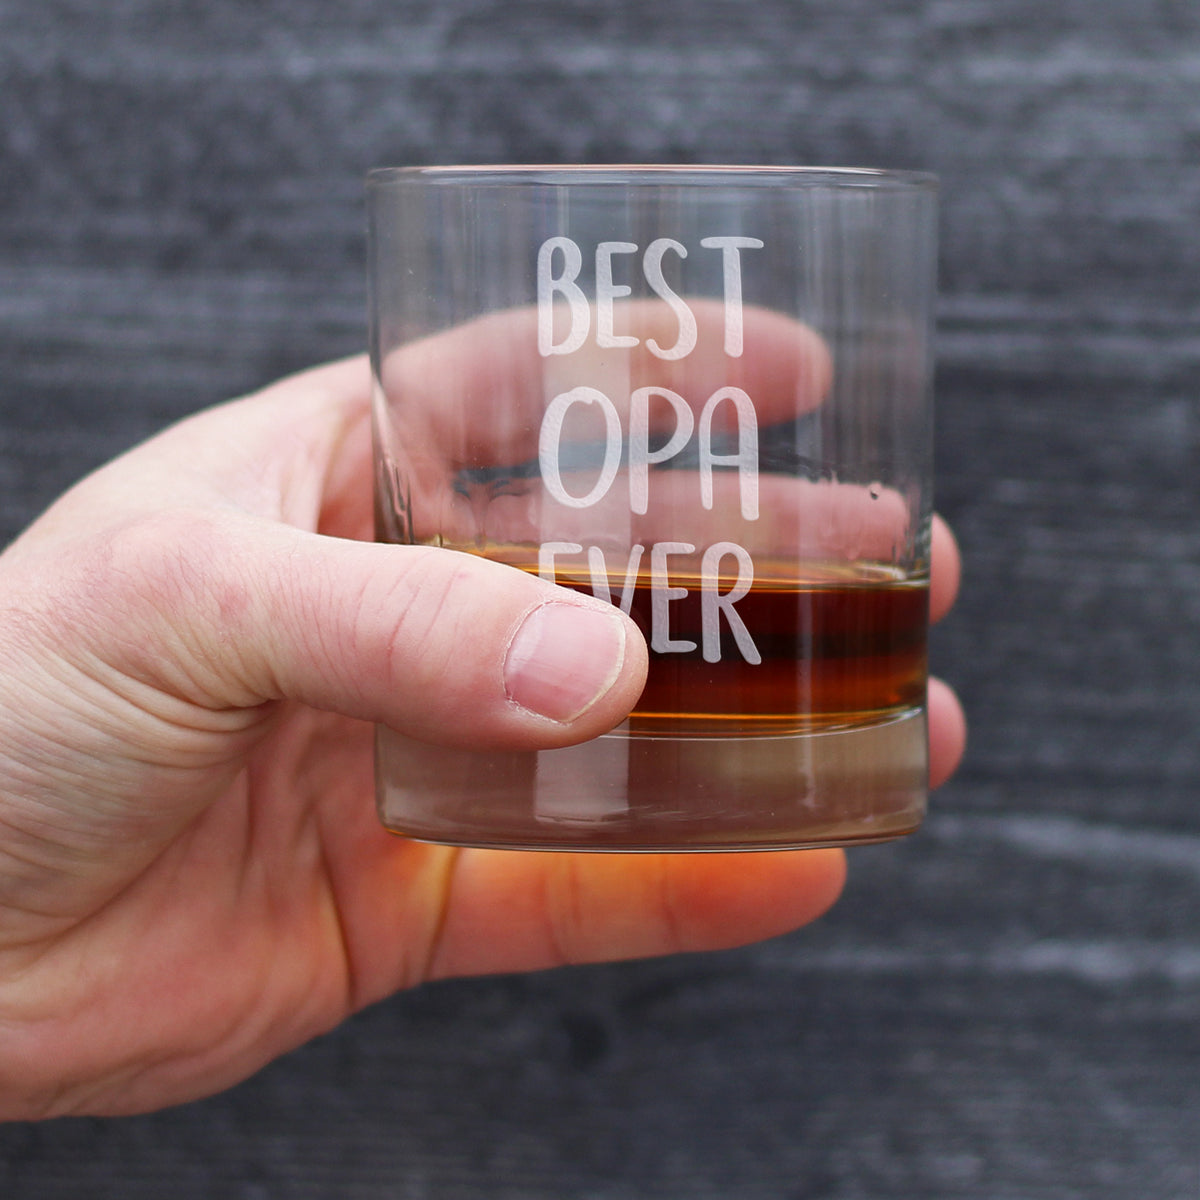 Best Opa Ever 10 oz Rocks Glass or Old Fashioned Glass, Etched Sayings, Father&#39;s Day Gift